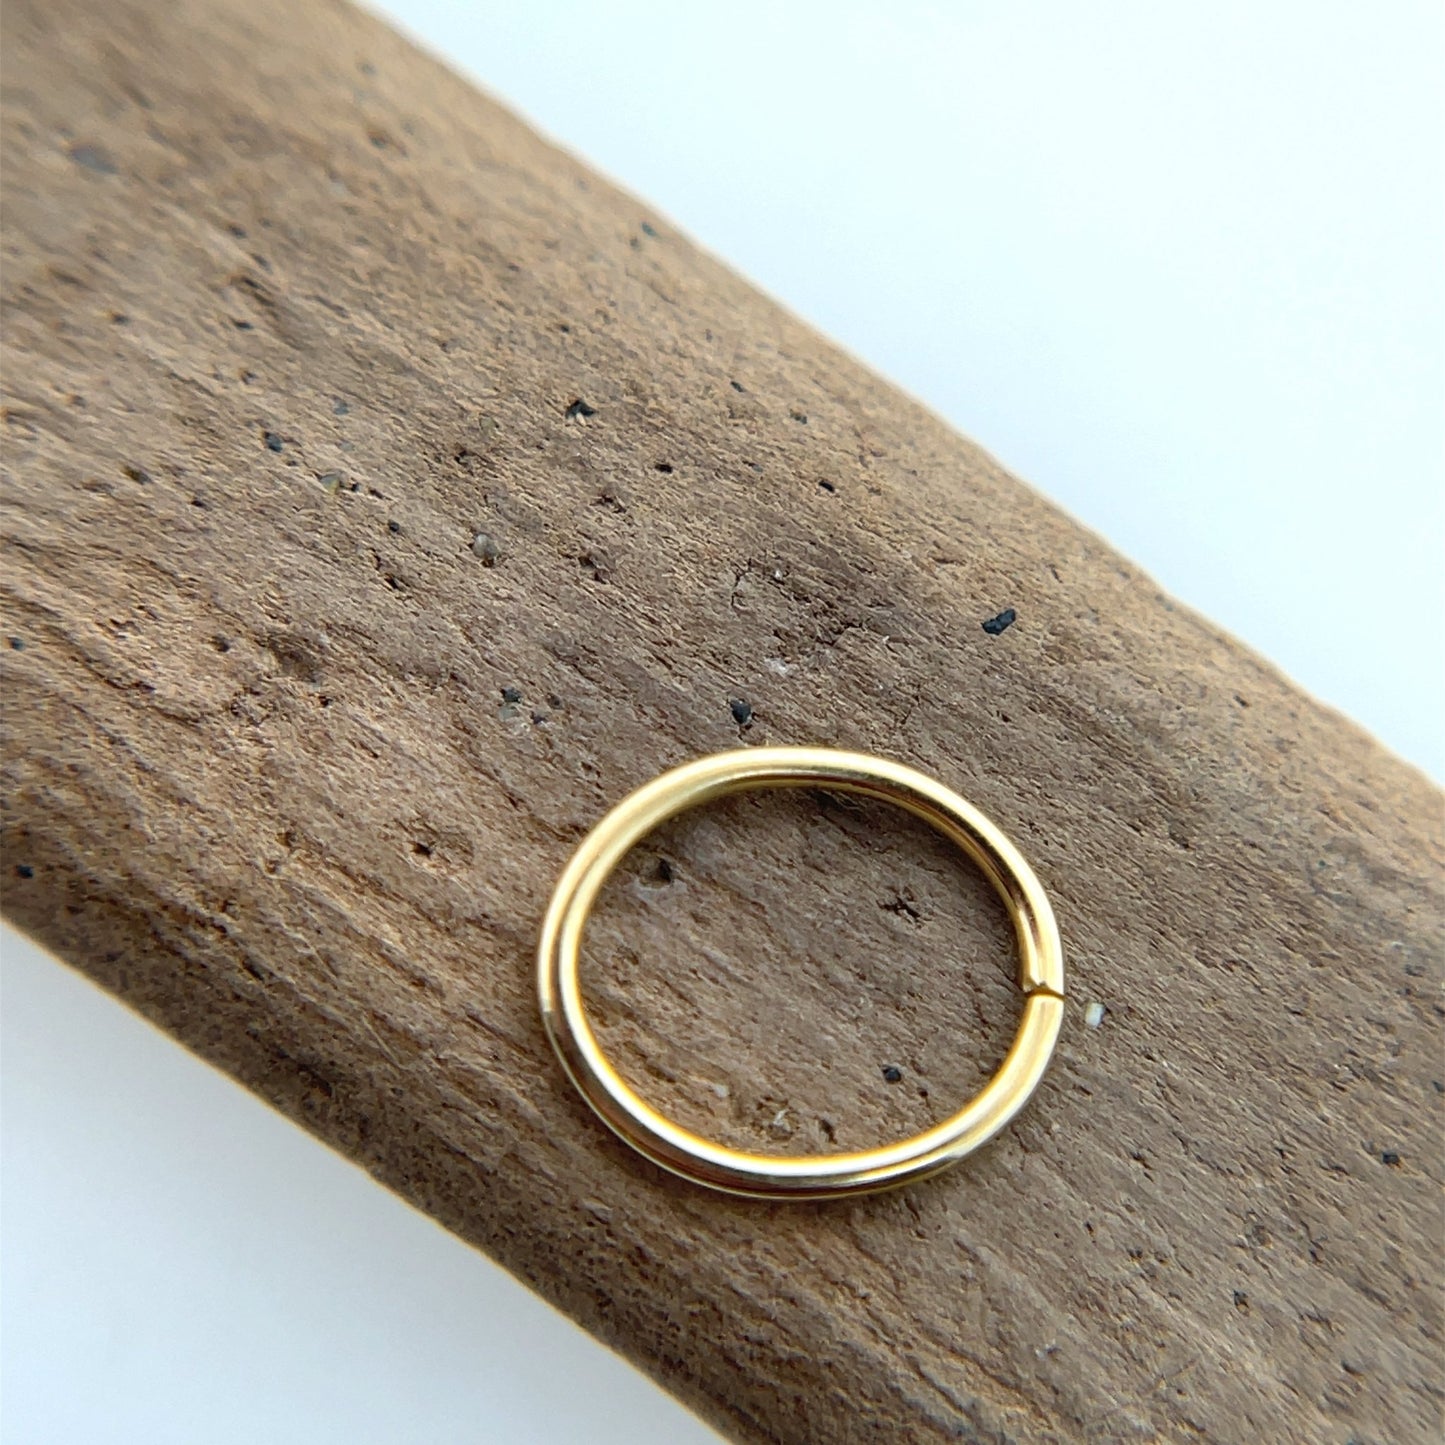 20g 14K Gold Oval Seam Ring - Agave in Bloom